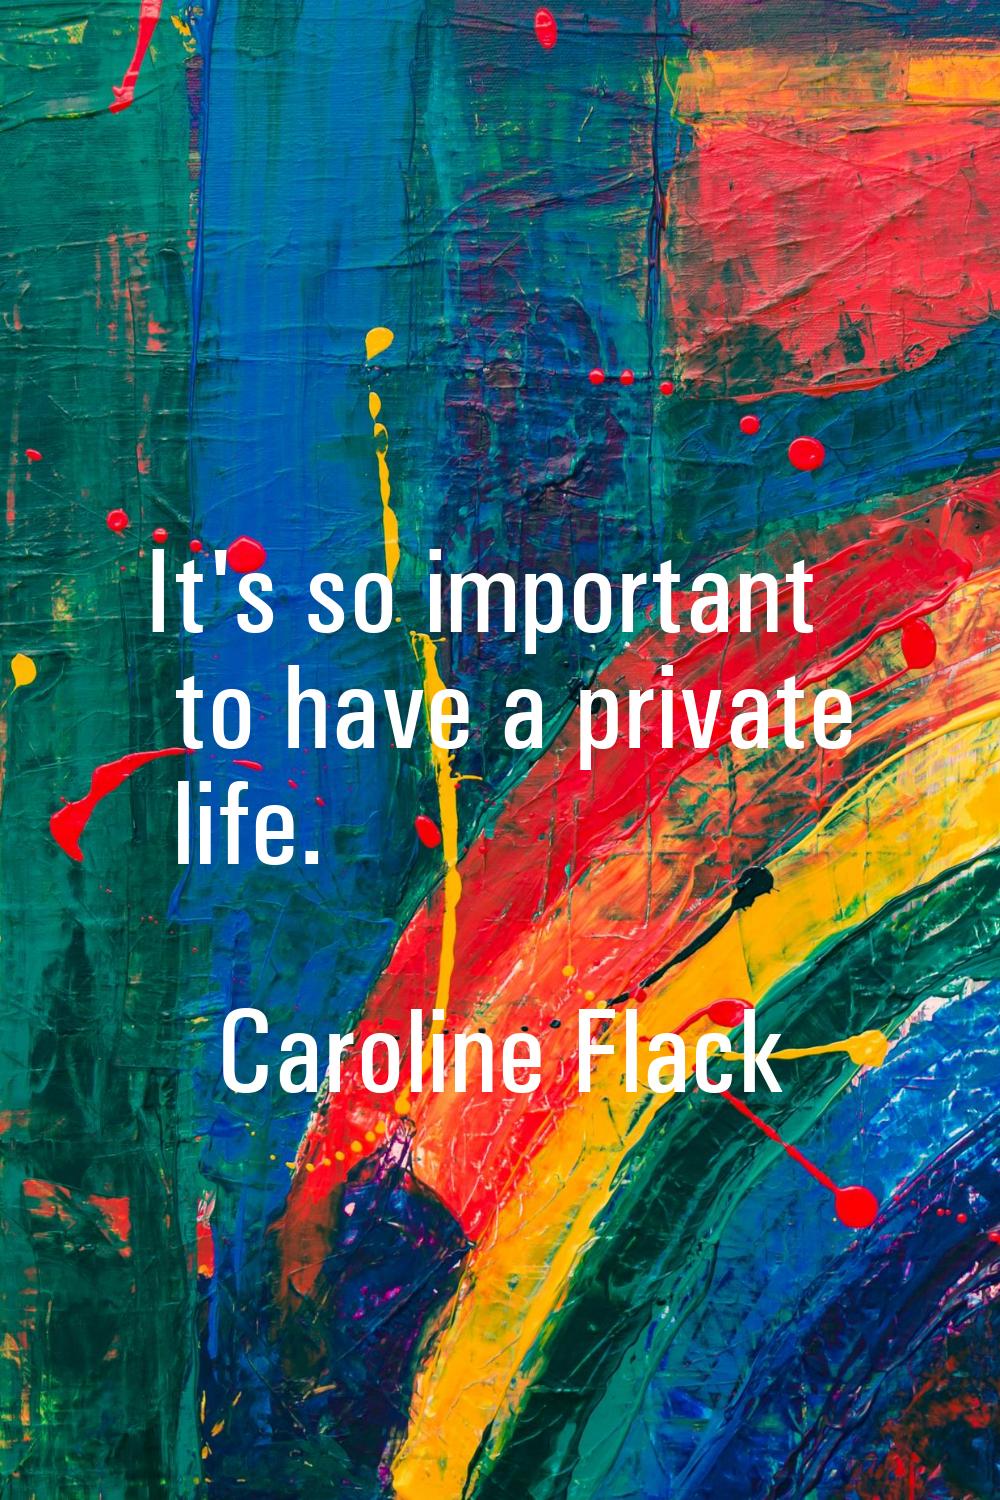 It's so important to have a private life.